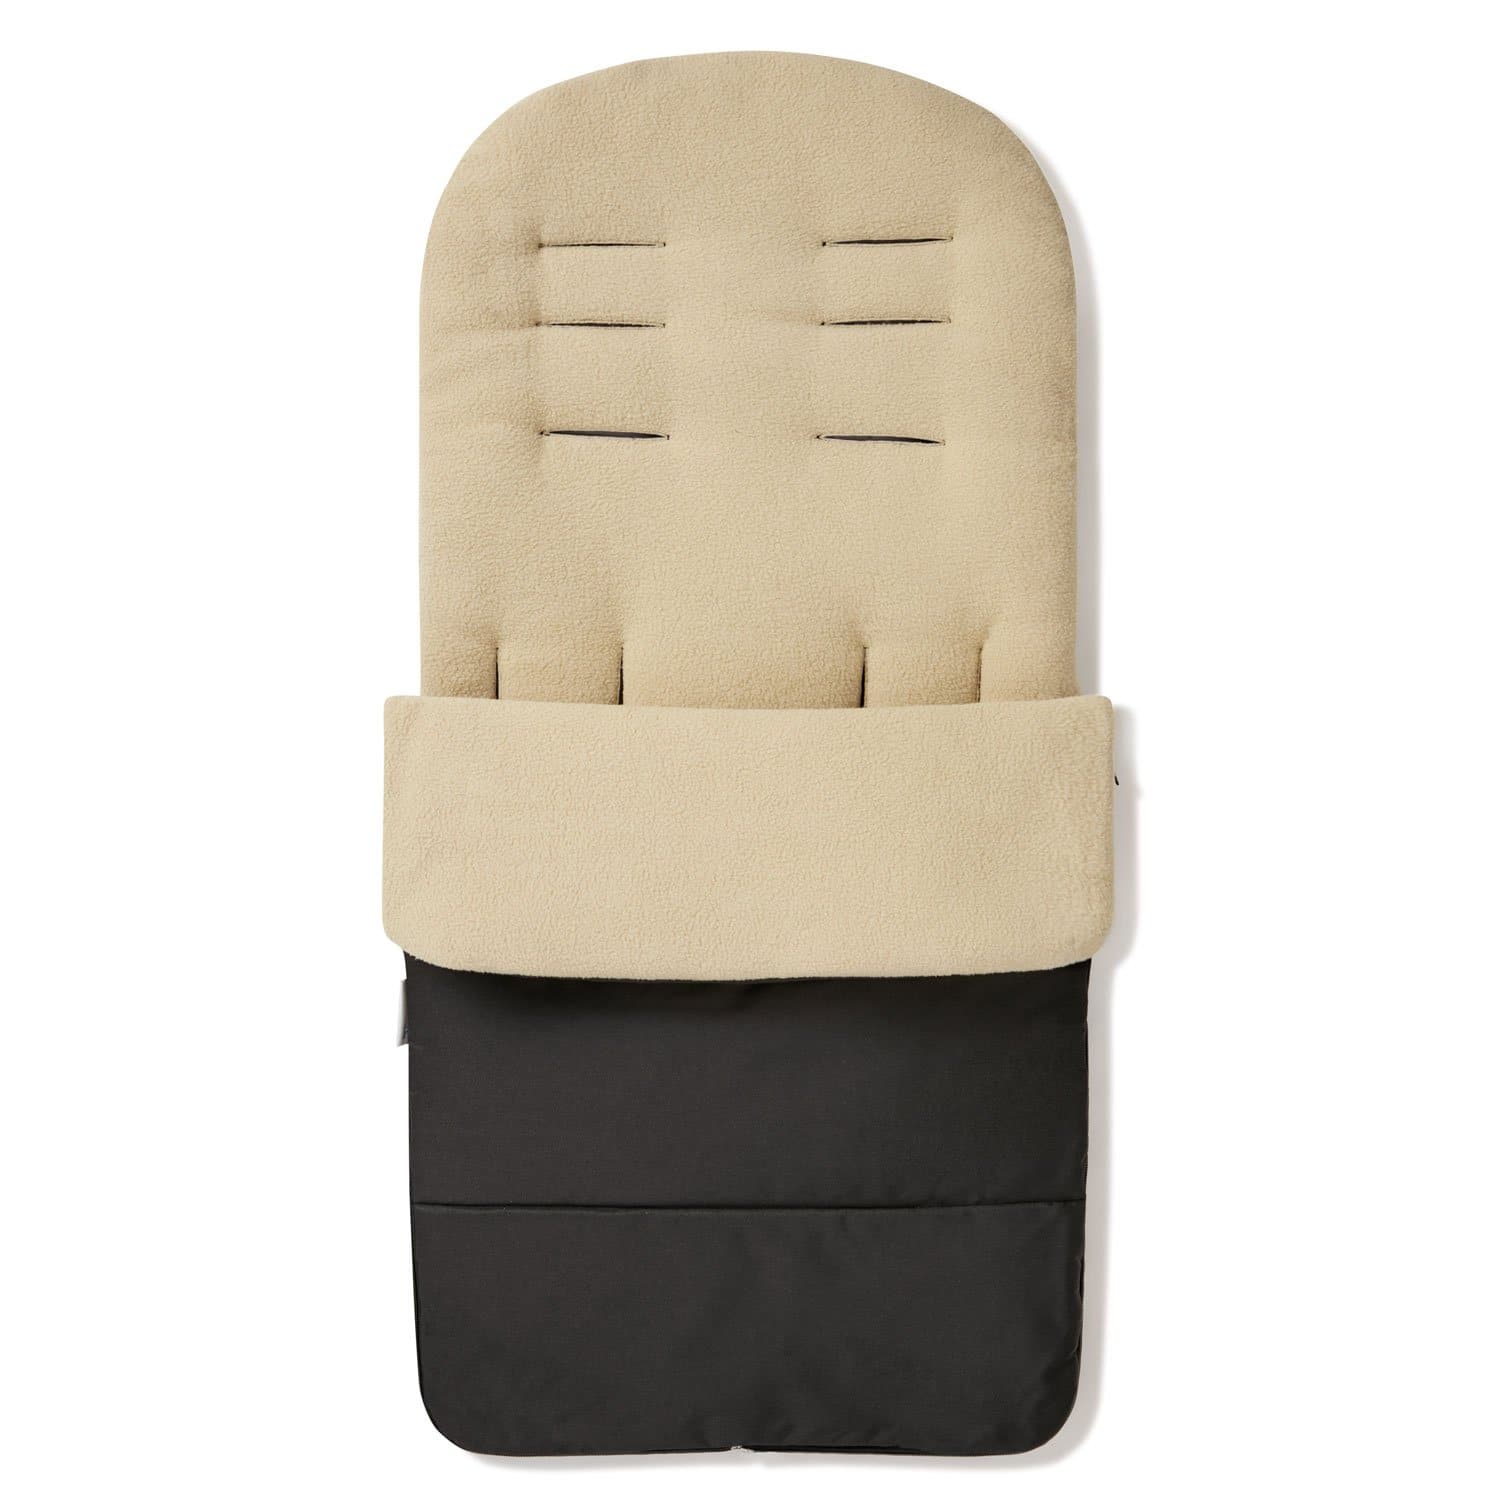 Premium Footmuff / Cosy Toes Compatible with Noukies - For Your Little One